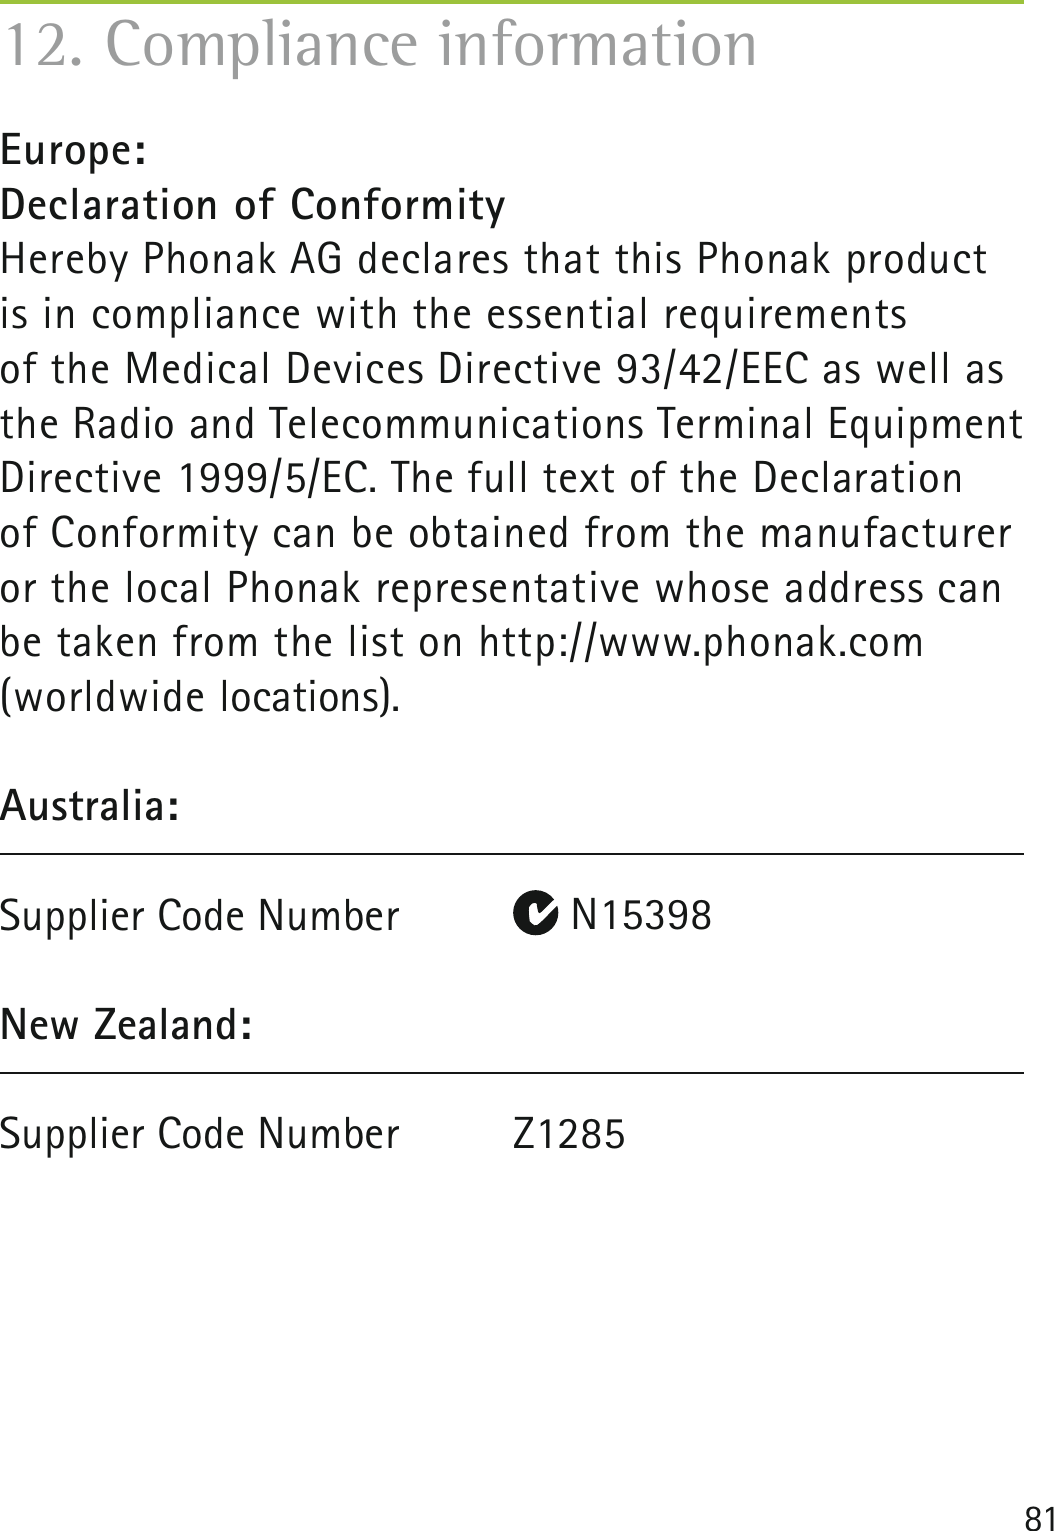 8112. Compliance informationEurope:Declaration of Conformity Hereby Phonak AG declares that this Phonak product is in compliance with the essential requirements  of the Medical Devices Directive 93/42/EEC as well as the Radio and Telecommunications Terminal Equipment Directive 1999/5/EC. The full text of the Declaration  of Conformity can be obtained from the manufacturer or the local Phonak representative whose address can be taken from the list on http://www.phonak.com (worldwide locations).Australia:Supplier Code Number   N15398New Zealand:Supplier Code Number  Z1285